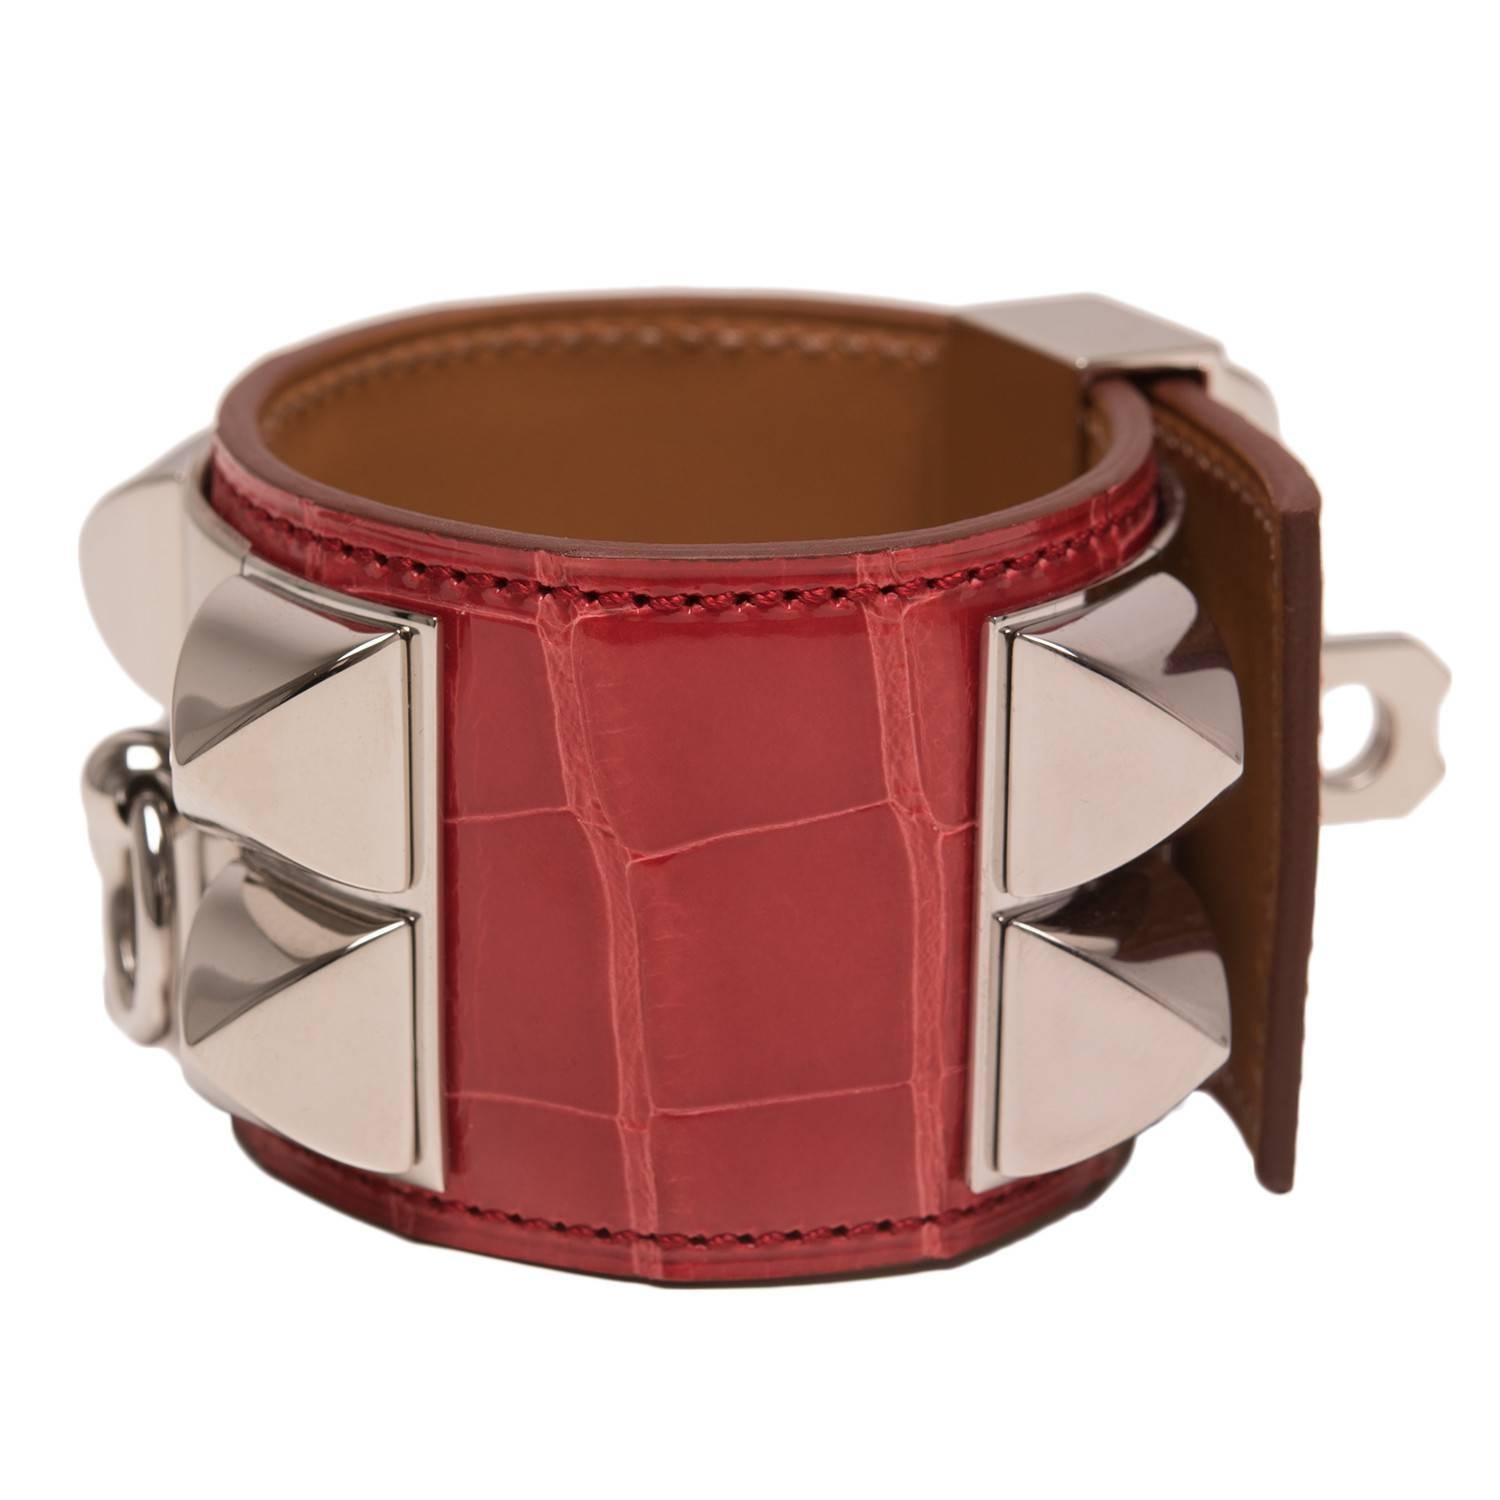 Hermes Collier de Chien (CDC) in Bougainvillier shiny alligator with palladium plated hardware in size small.

This style features palladium pyramid studs, center ring and adjustable push lock closure.

Collection: Q Square

Origin: